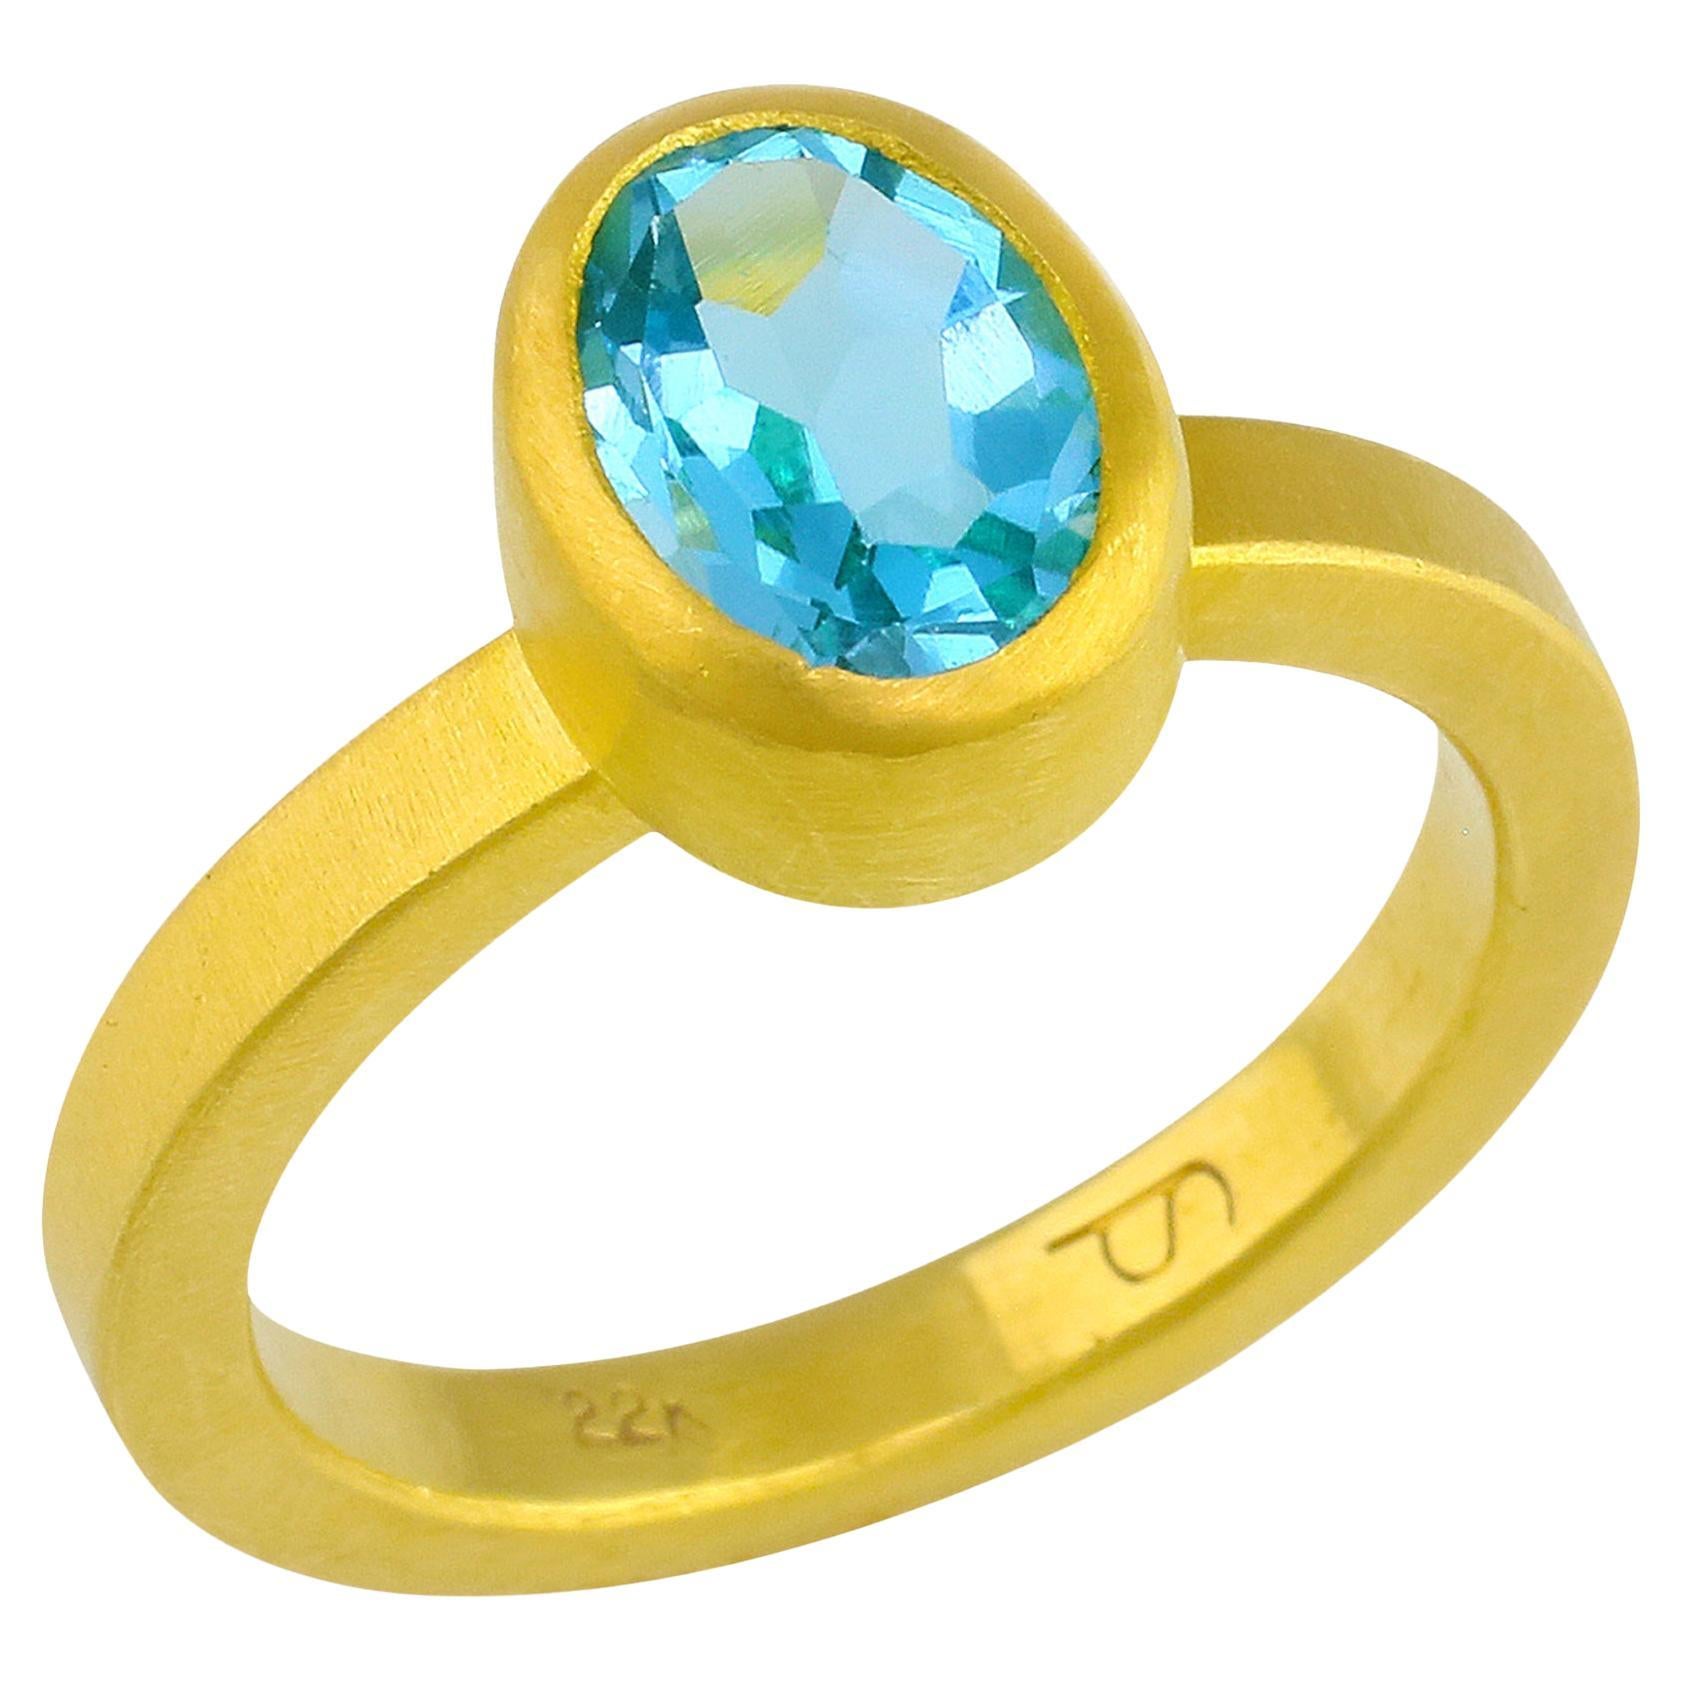 PHILIPPE SPENCER 2.15 Ct. Blue Topaz Solitaire Ring in 22K Gold For Sale